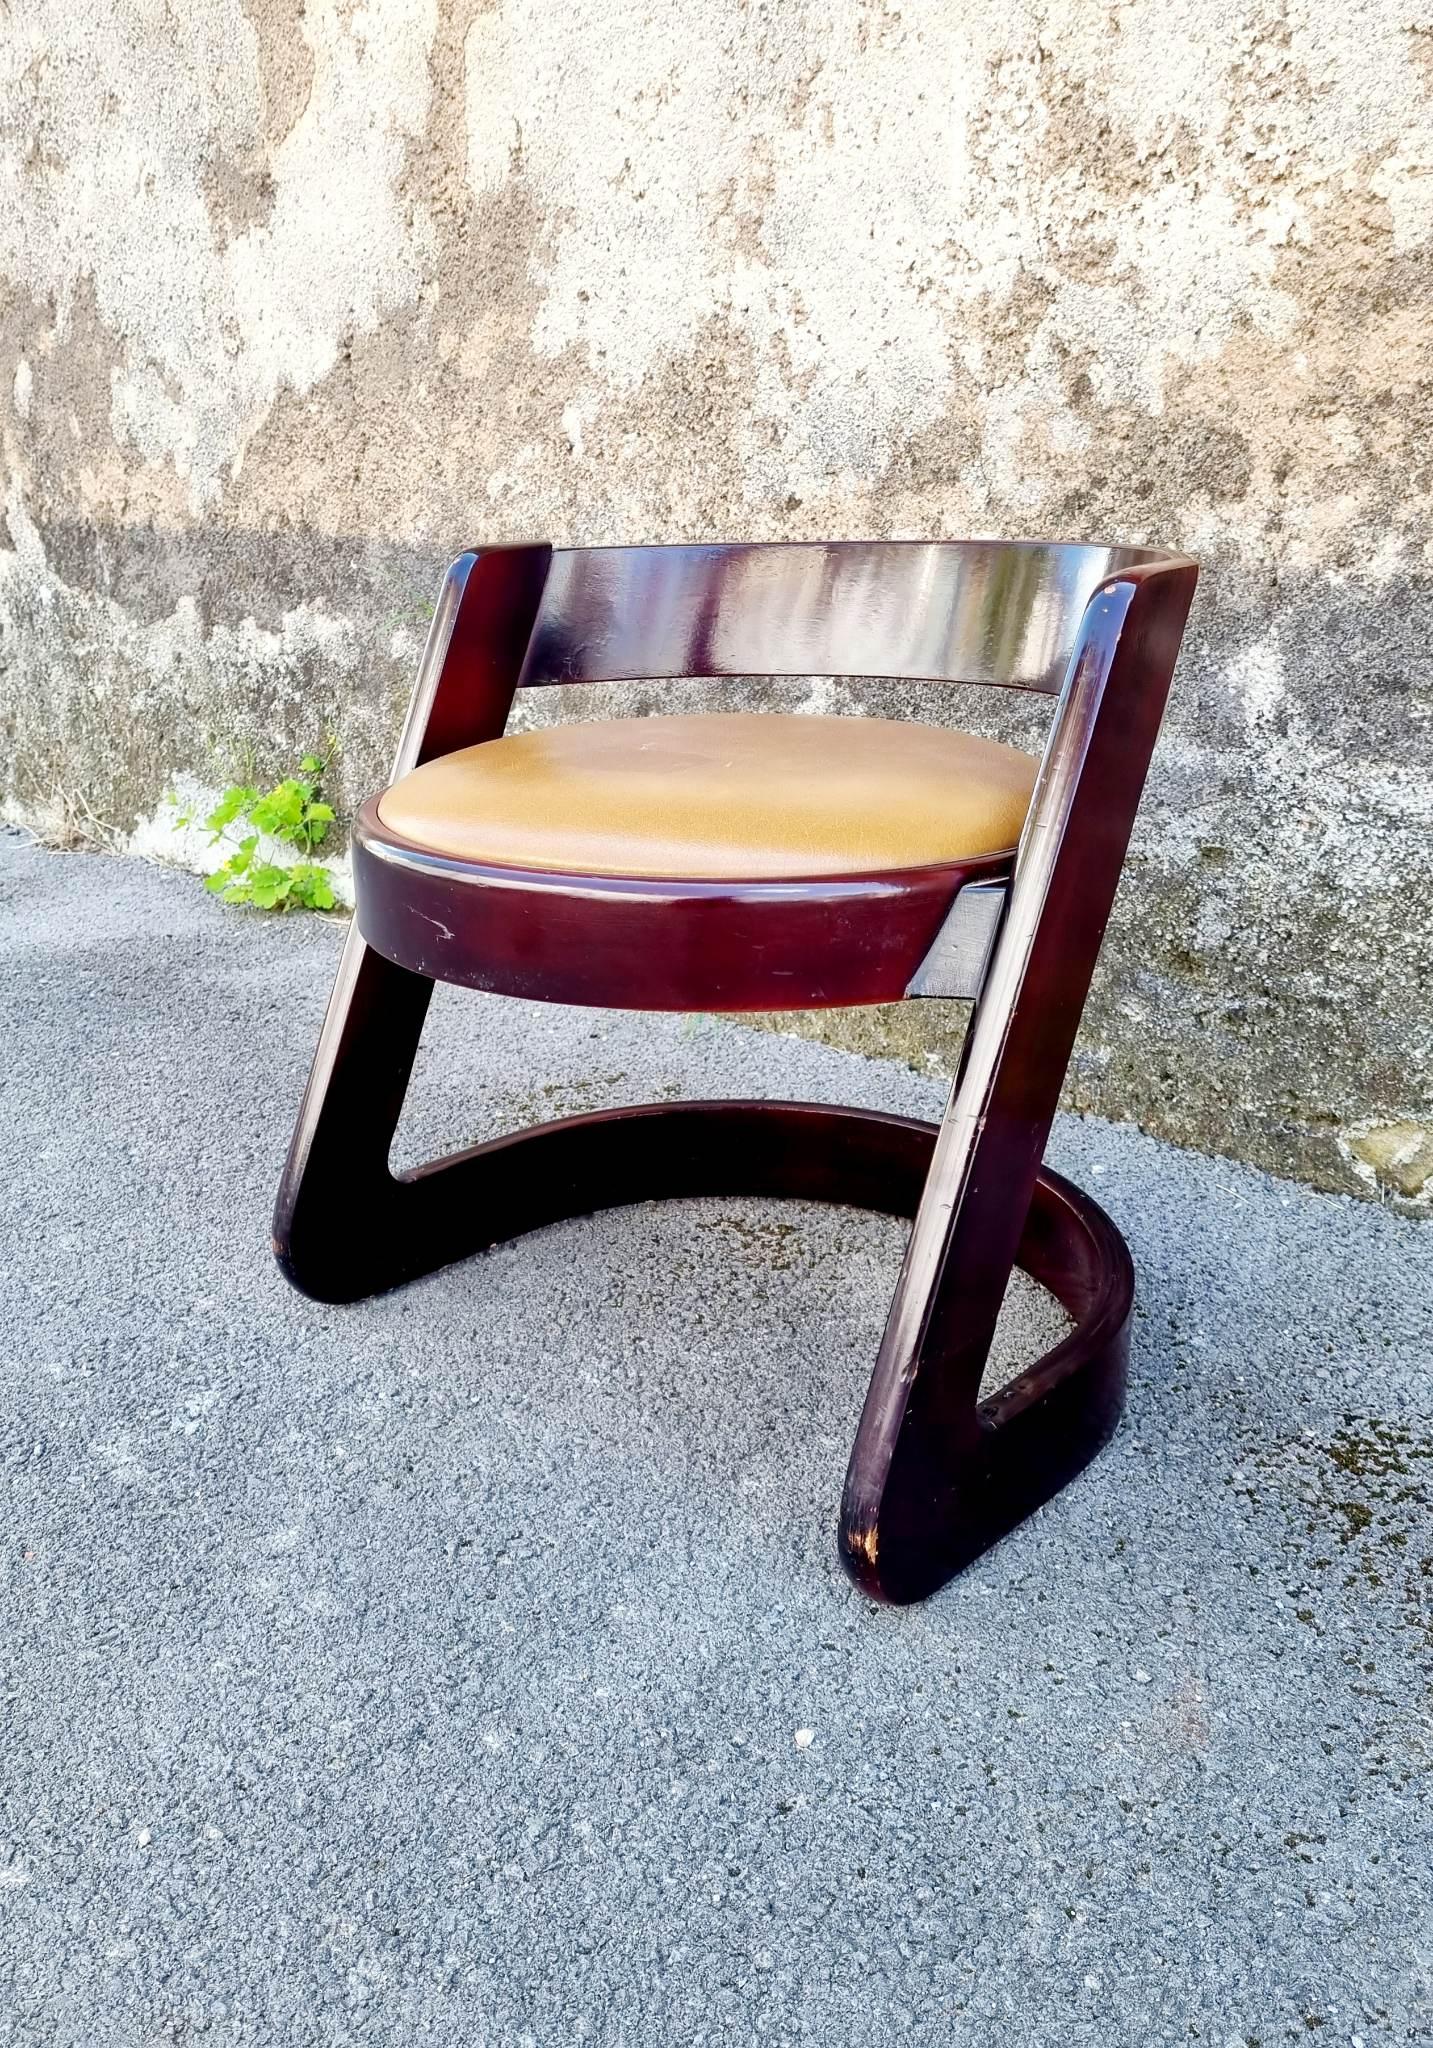 Rare Midcentury Stool by Willy Rizzo for Mario Sabot, Italy 70s For Sale 1